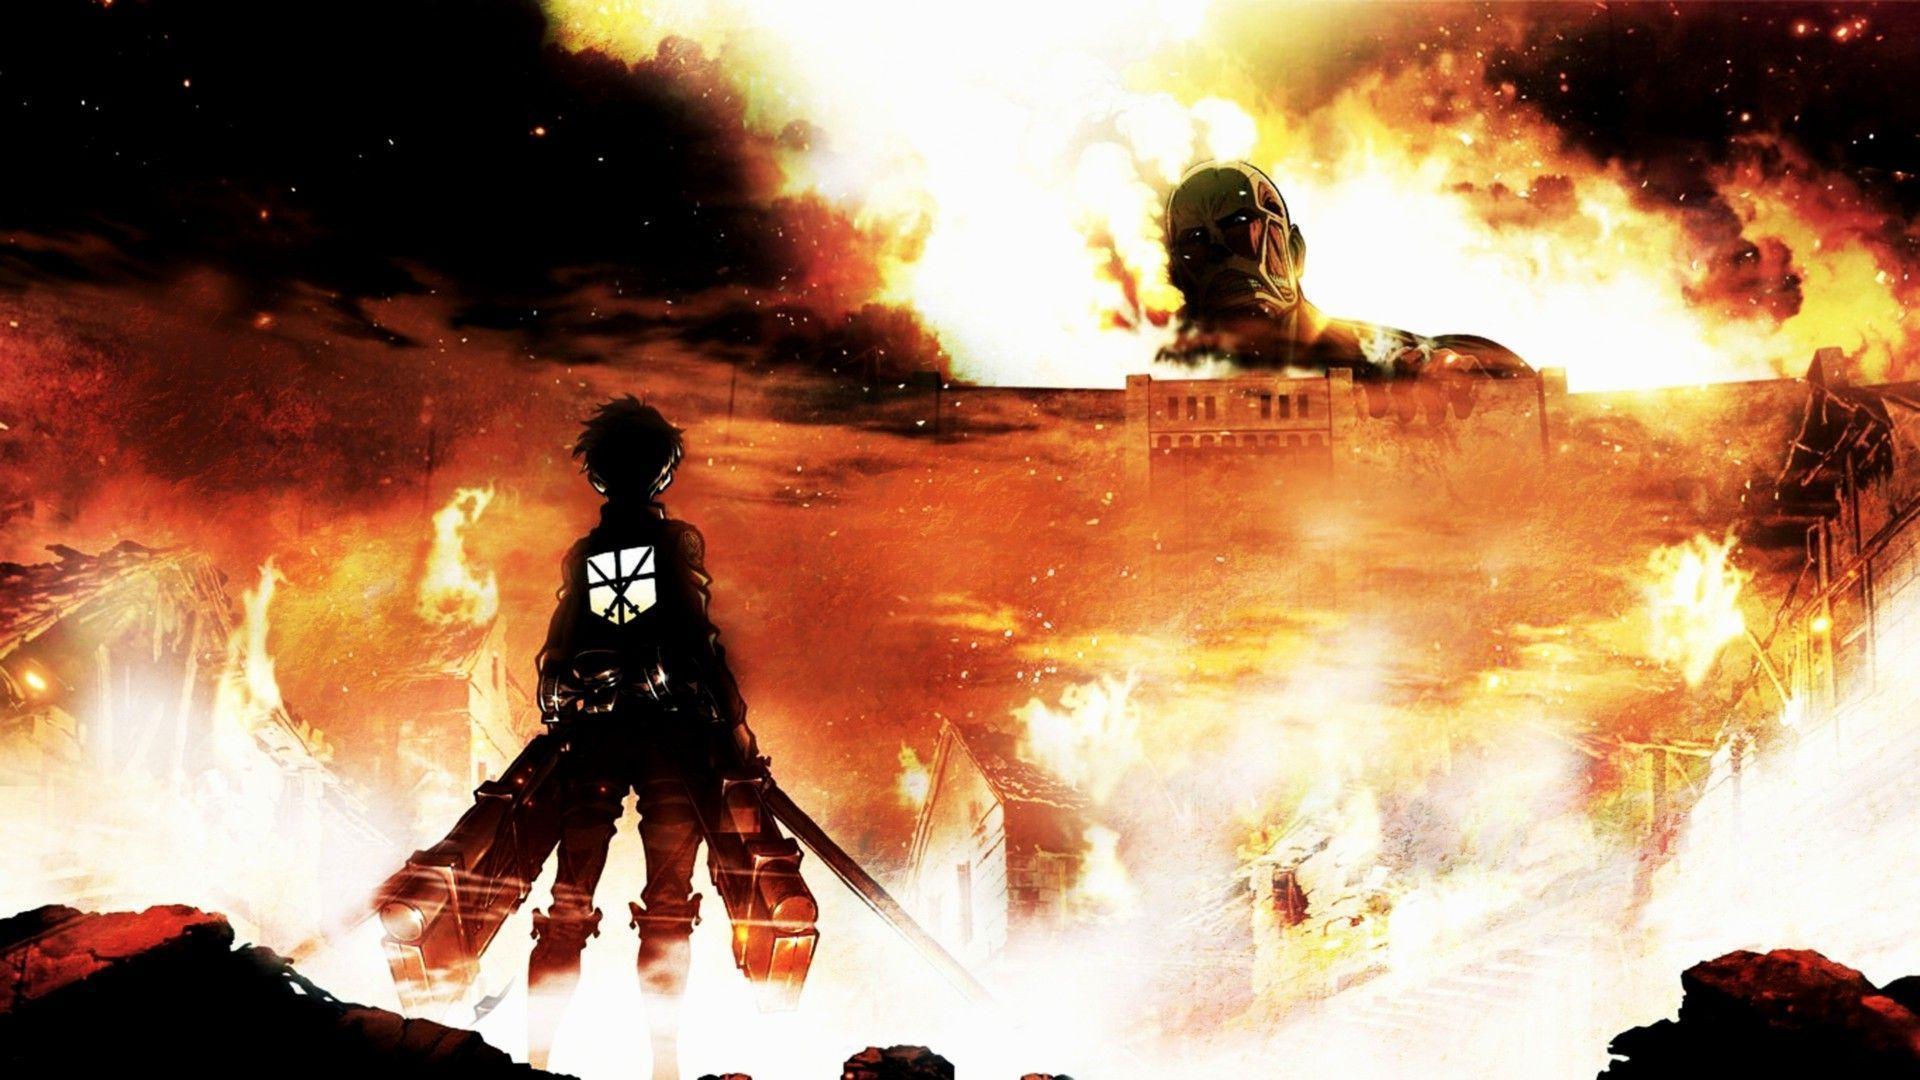 Attack On Titan (for The Non Anime Audience)